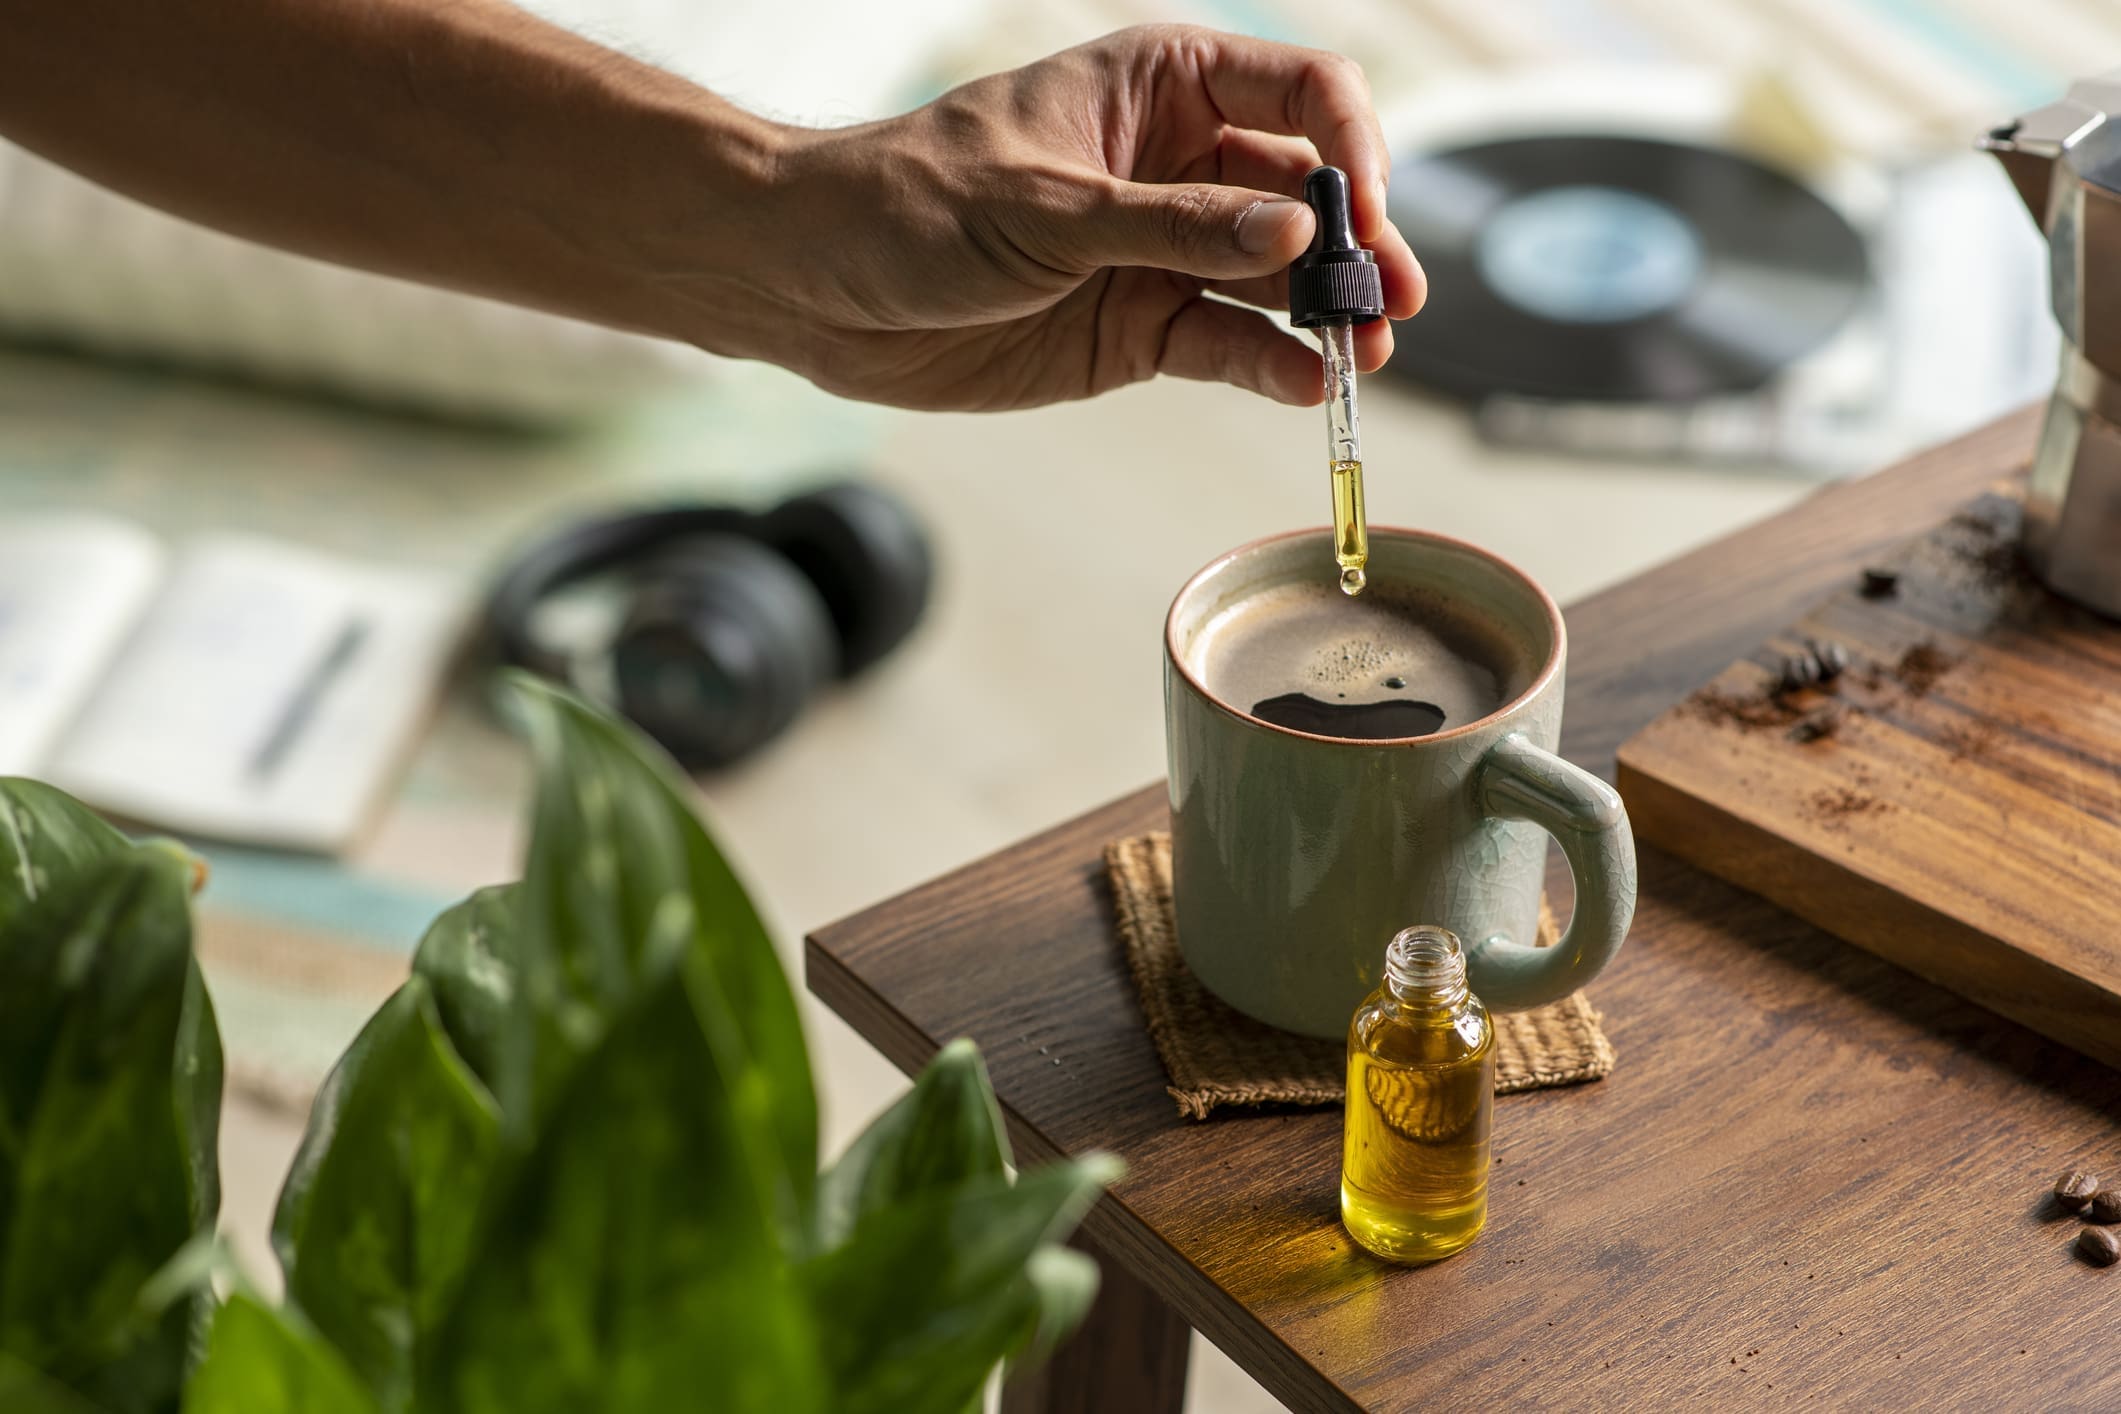 Man Dropping Cbd Oil Or Cannabis Oil Into A Coffee Cup While Relaxing At Home